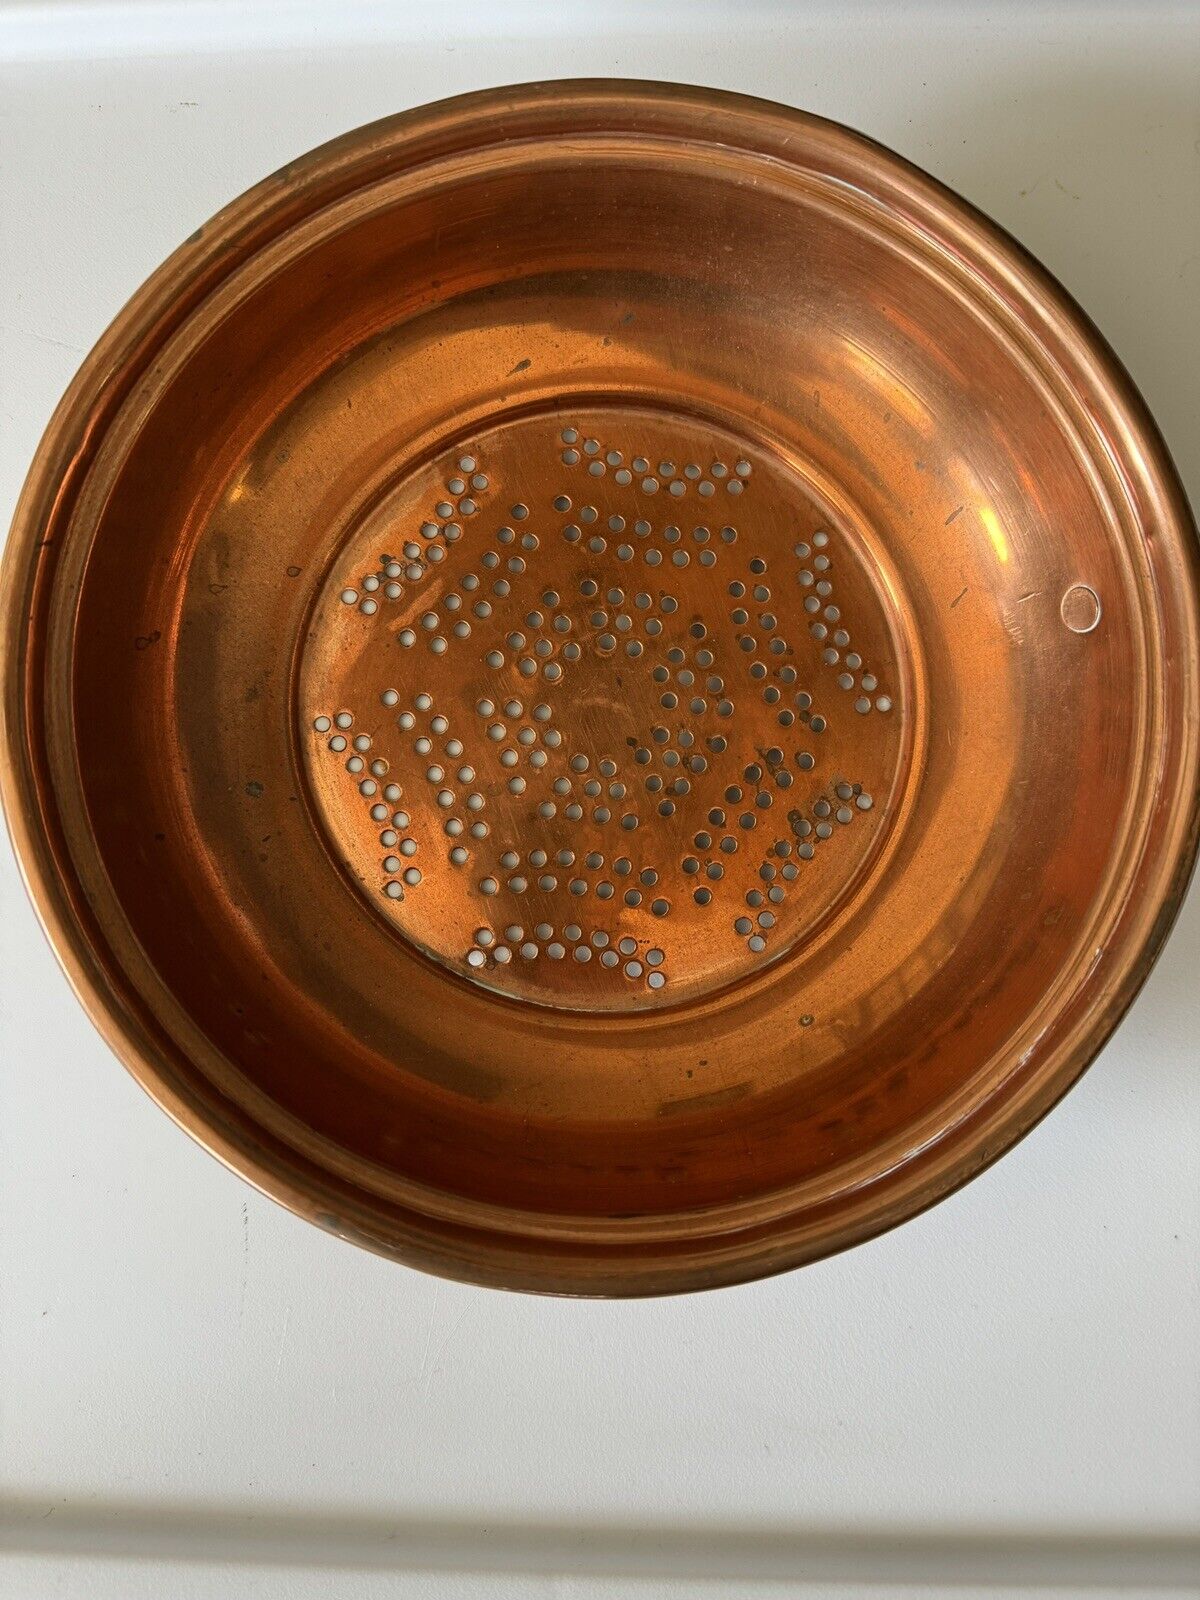 Rare find - Antique French Farmhouse Copper Strainer with Metal Wall Hanger